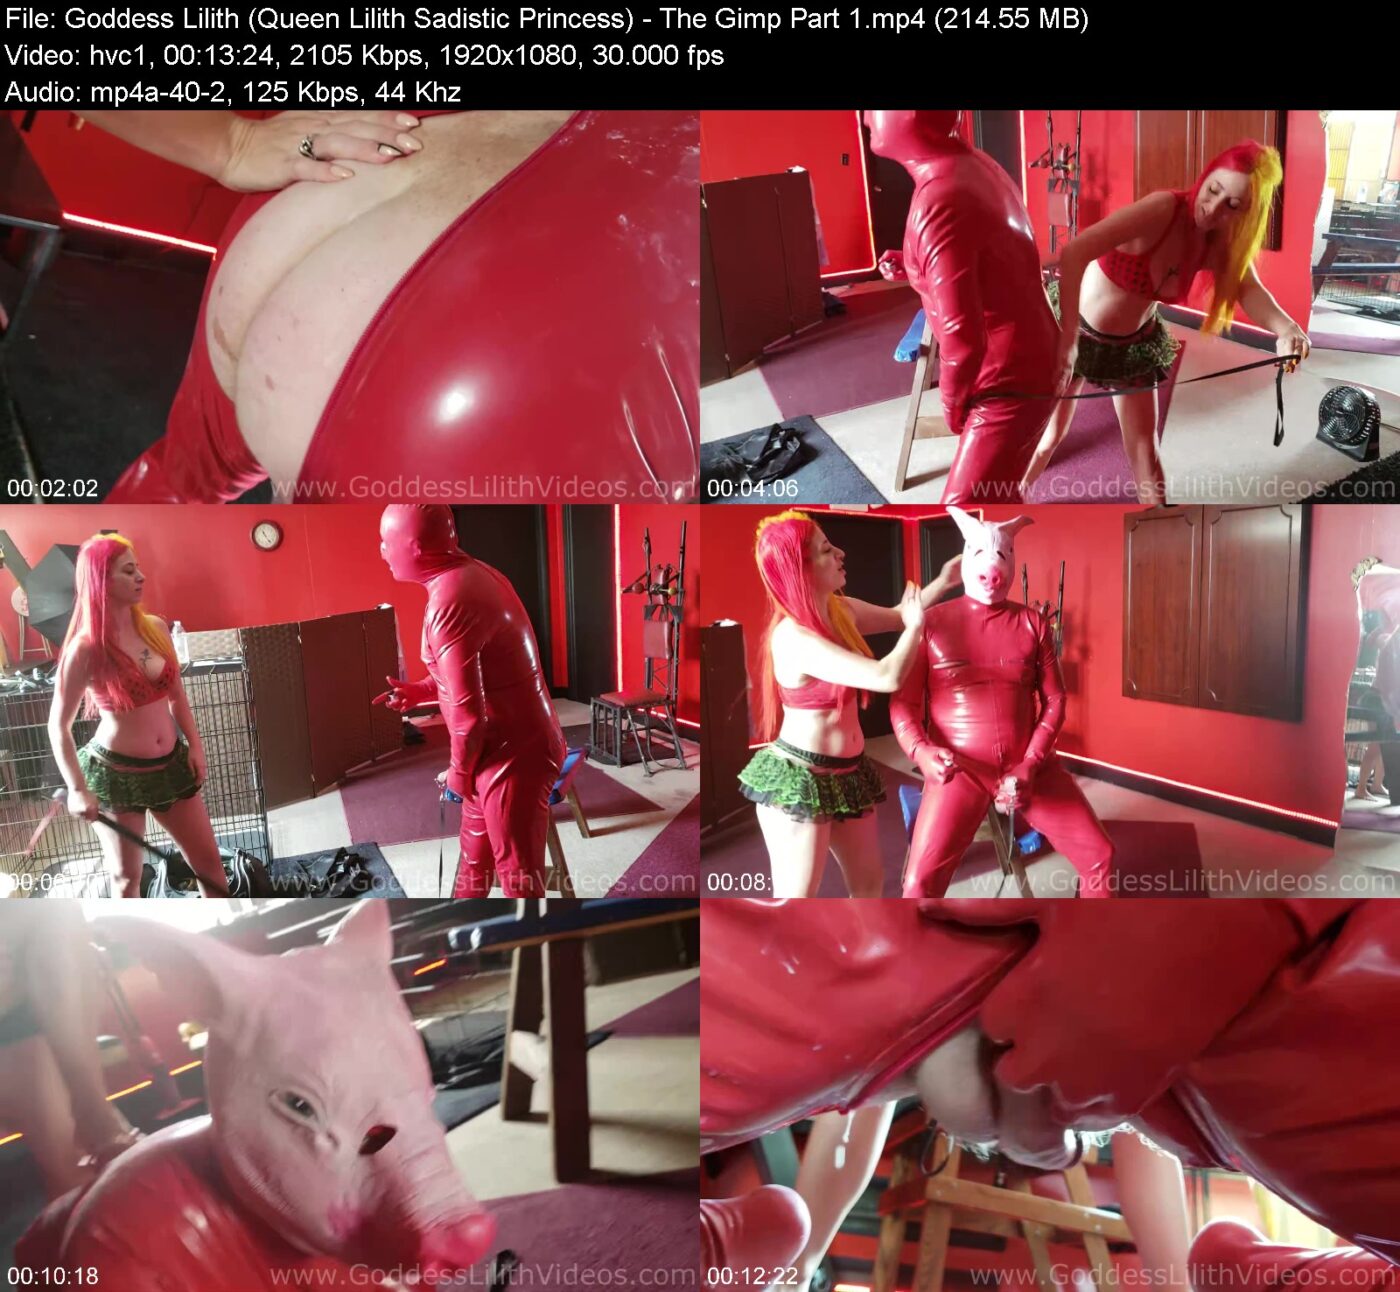 Goddess Lilith (Queen Lilith Sadistic Princess) in The Gimp Part 1